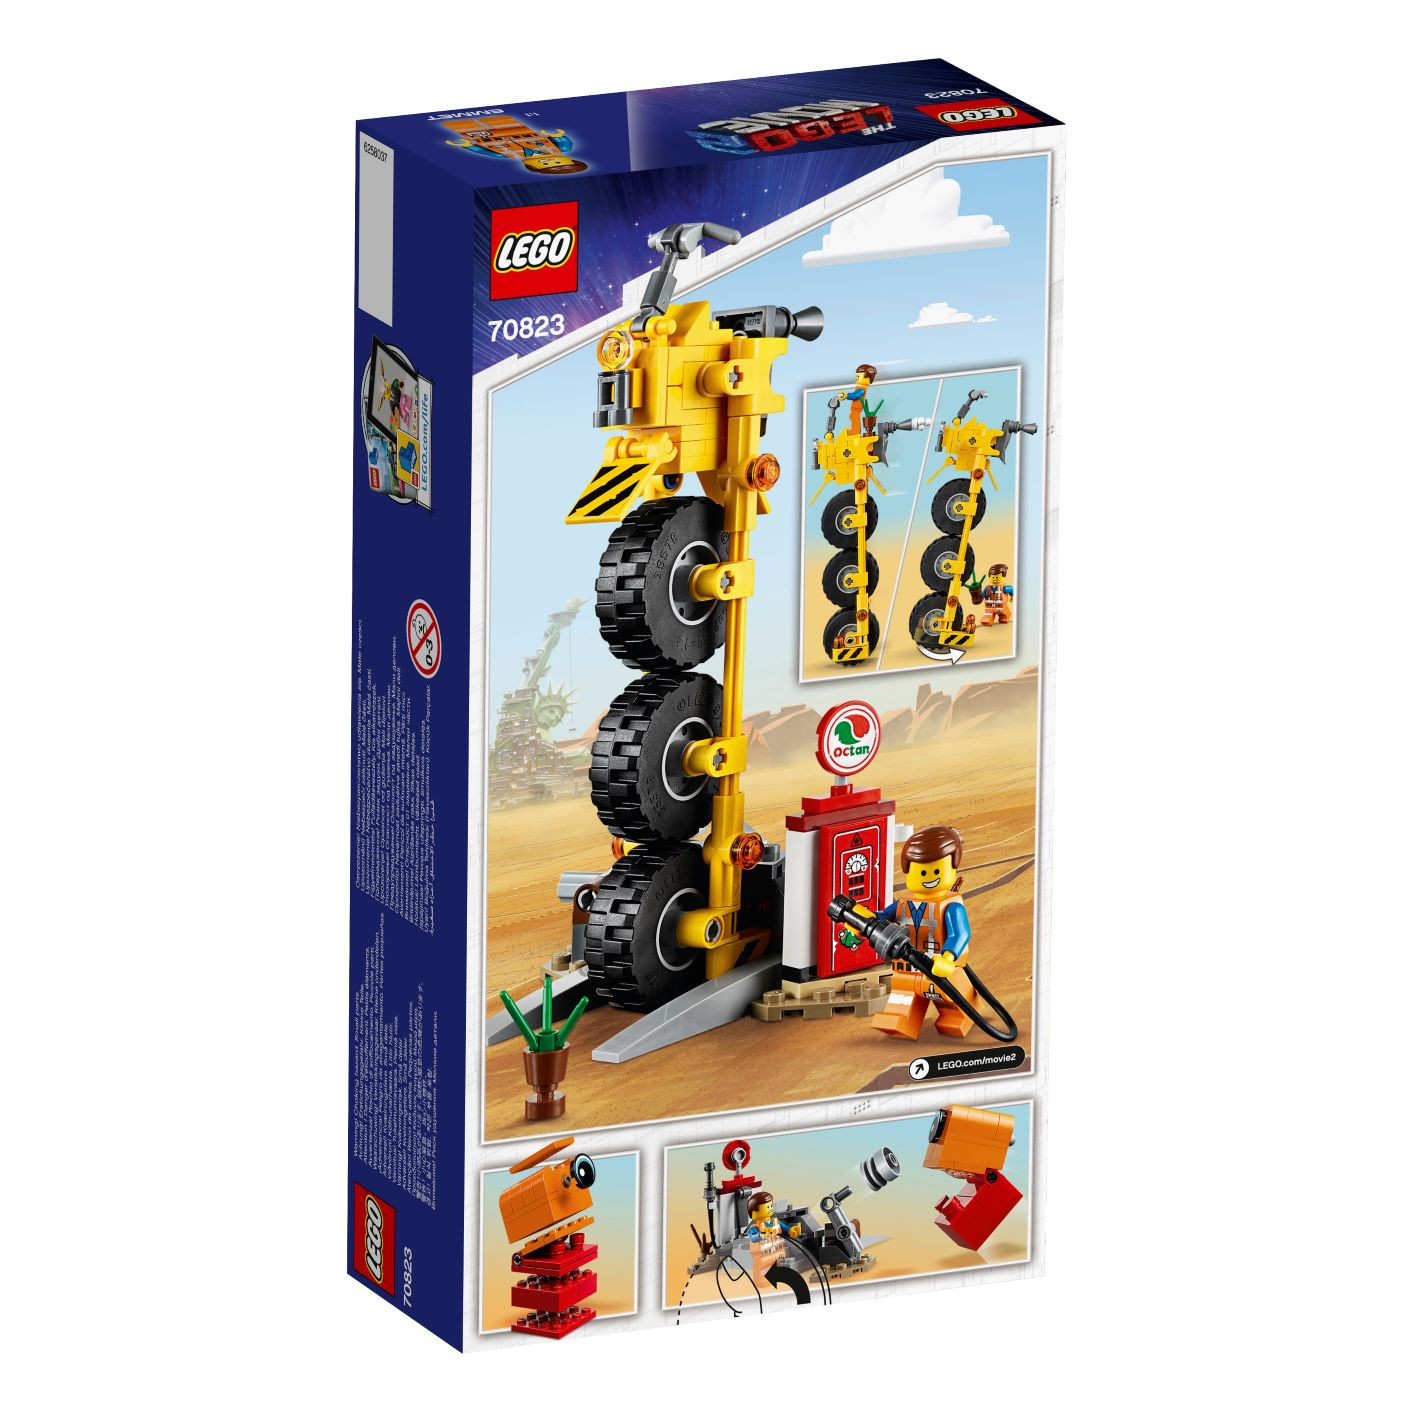 LEGO - Emmet s Thricycle!Toysrus.com.sa,The Official Site-Toys,Games,Baby & More